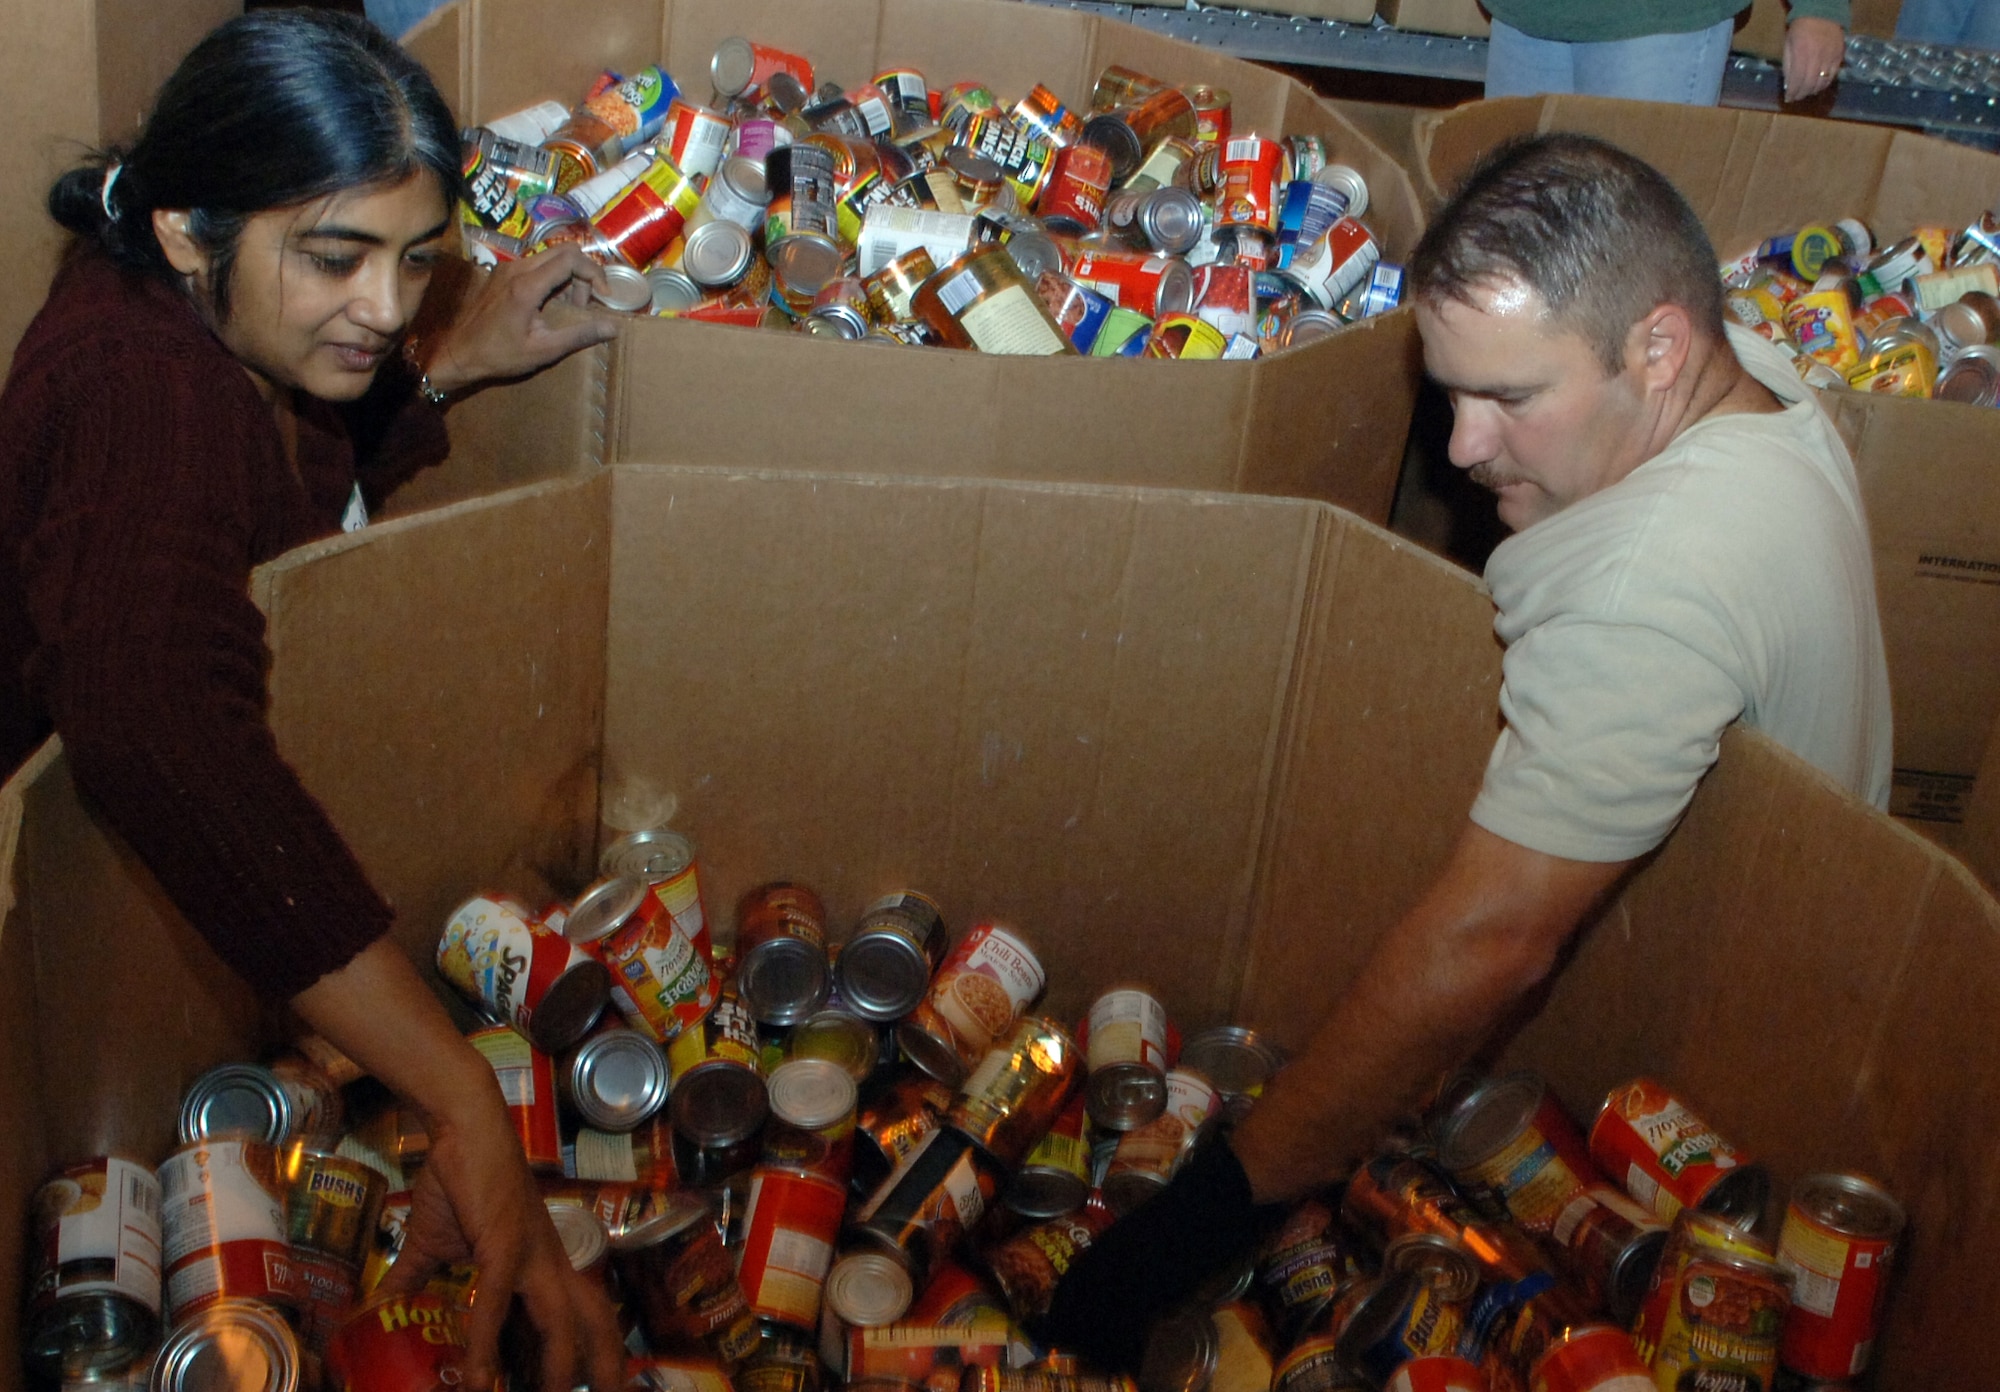 Sudha Brown (left) and Master Sgt. David Maxwell, along with 43 other Airmen
and civilians from 12th Air Force headquarters, volunteered their time
Saturday to provide service to more than 10,000 Tucson residents in need in
the local community.  The team, who schedules time each quarter for group
volunteer projects, volunteered at the Tucson Community Food Bank, a local
charity striving to reduce the impact of hunger and chronic malnutrition
through programs of advocacy and nutrition education.
